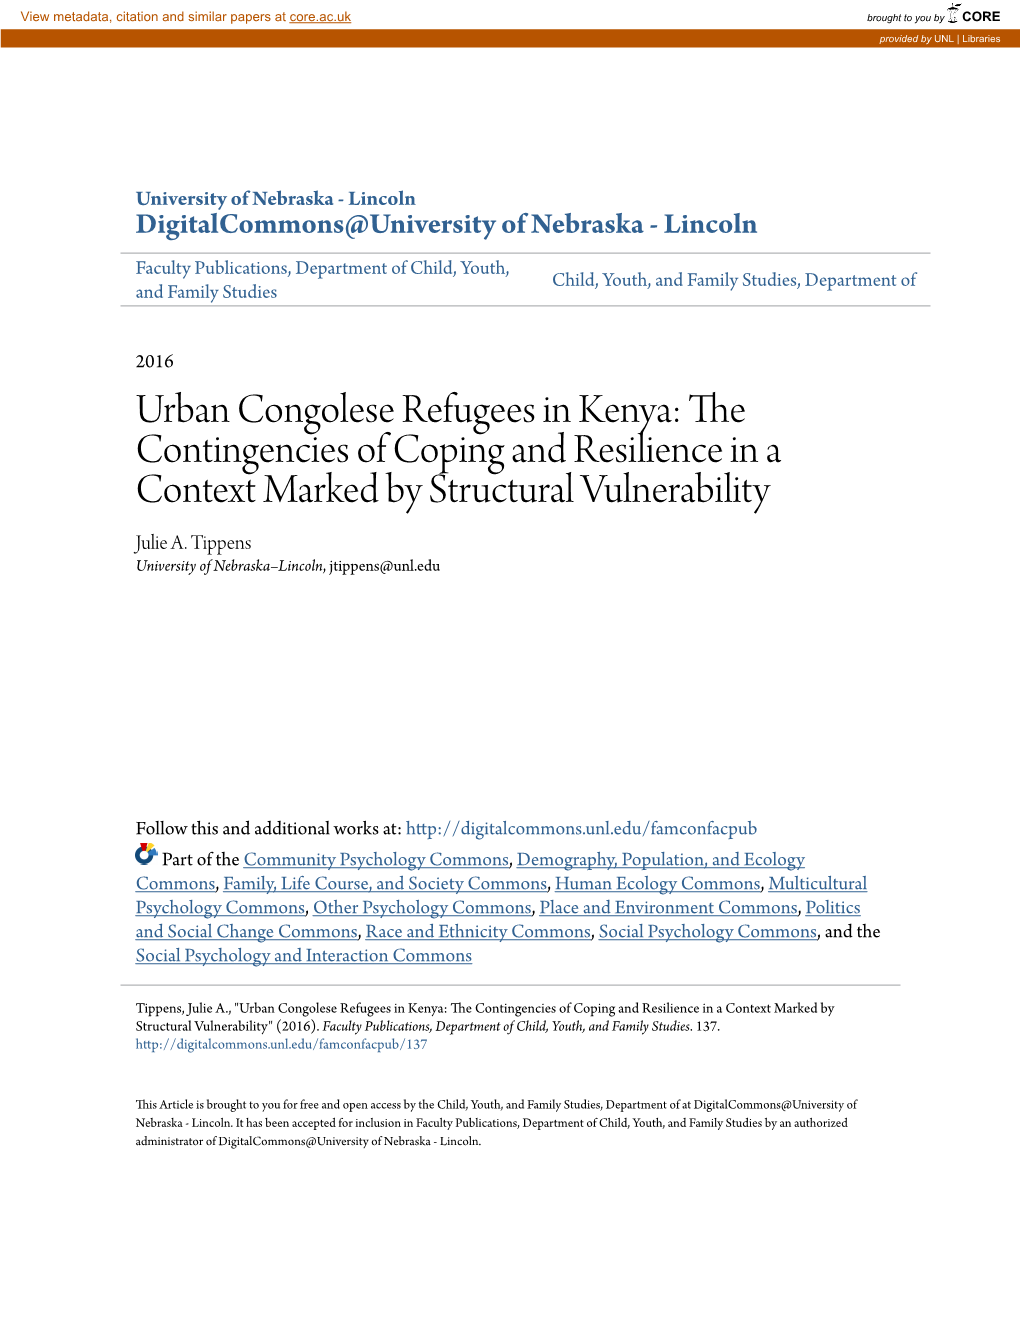 Urban Congolese Refugees in Kenya: the Contingencies of Coping and Resilience in a Context Marked by Structural Vulnerability Julie A